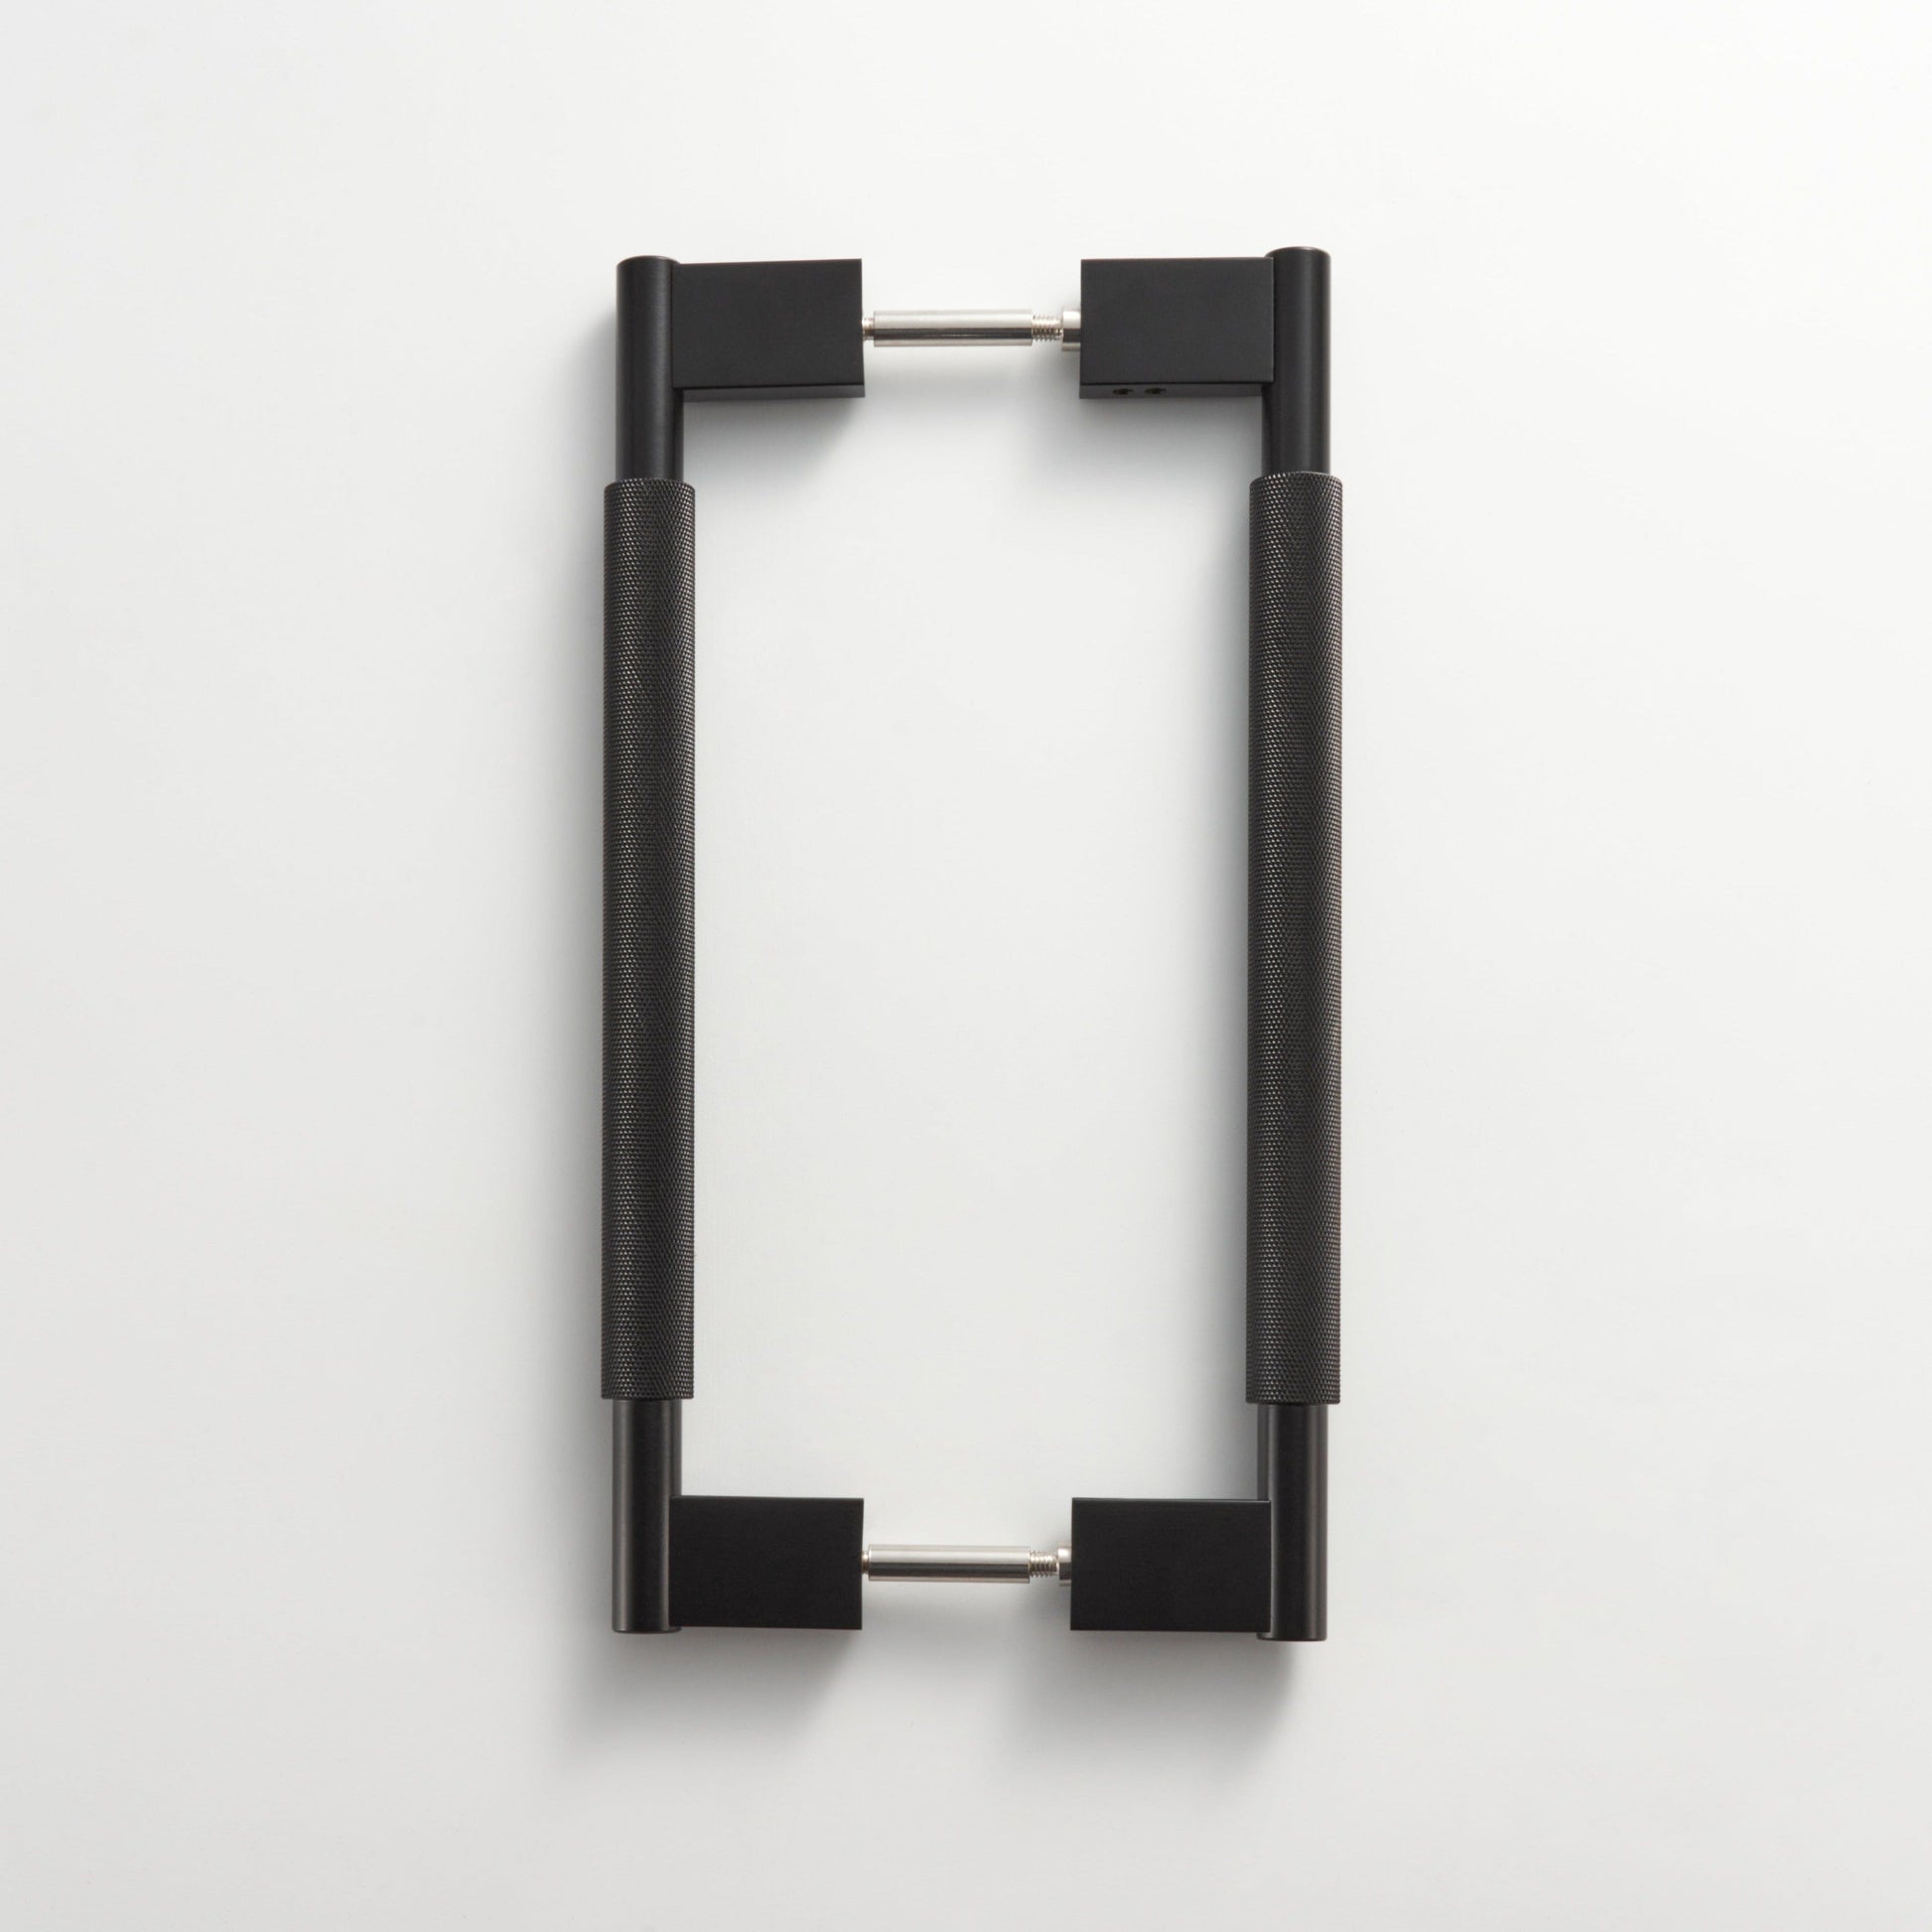 Bayside Luxe - Double Sided Solid Black Brass Door Pull  - Bronte 300 x 55mm (HS268mm)